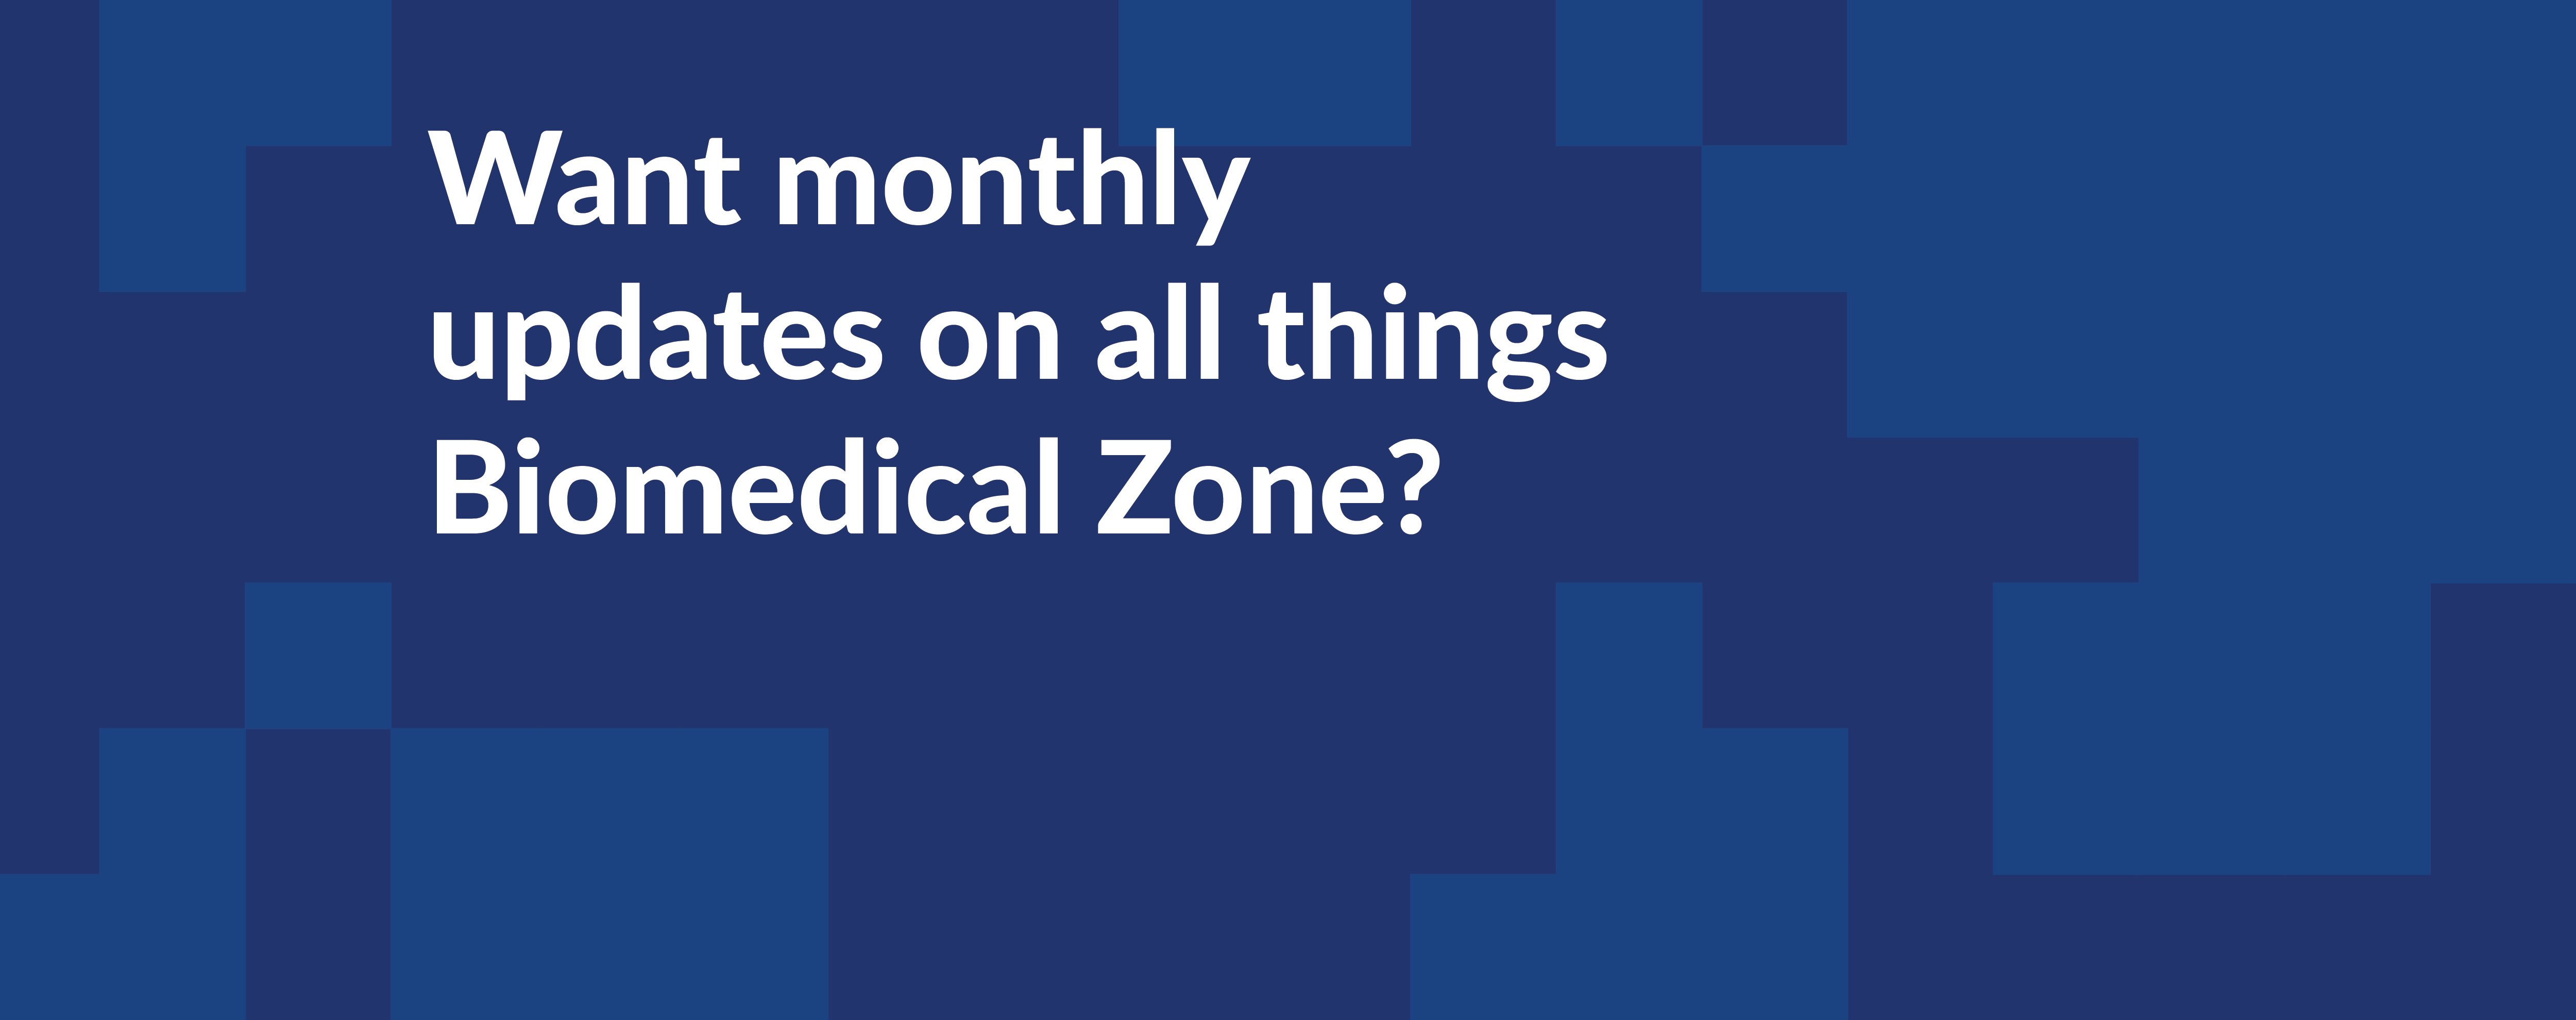 Image of text displaying: Want monthly updates on all thing Biomedical Zone? 